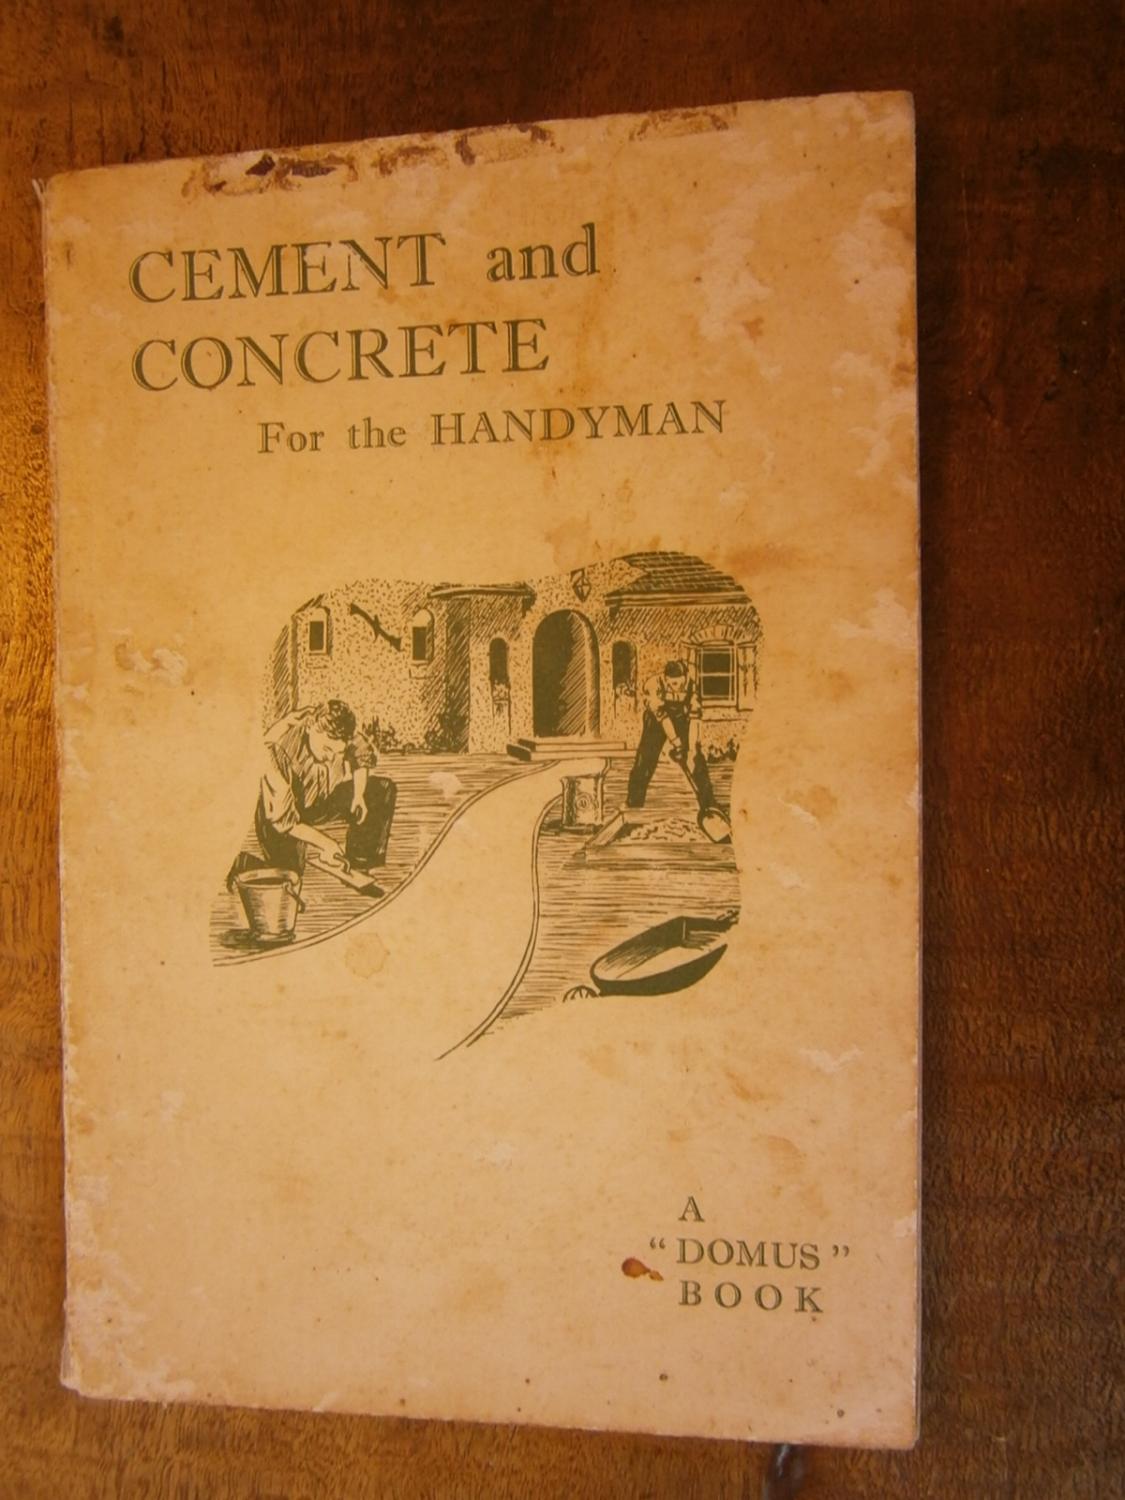 CEMENT AND CONCRETE FOR THE HANDYMAN: A COMPLETE WORK ON ALL FORMS OF